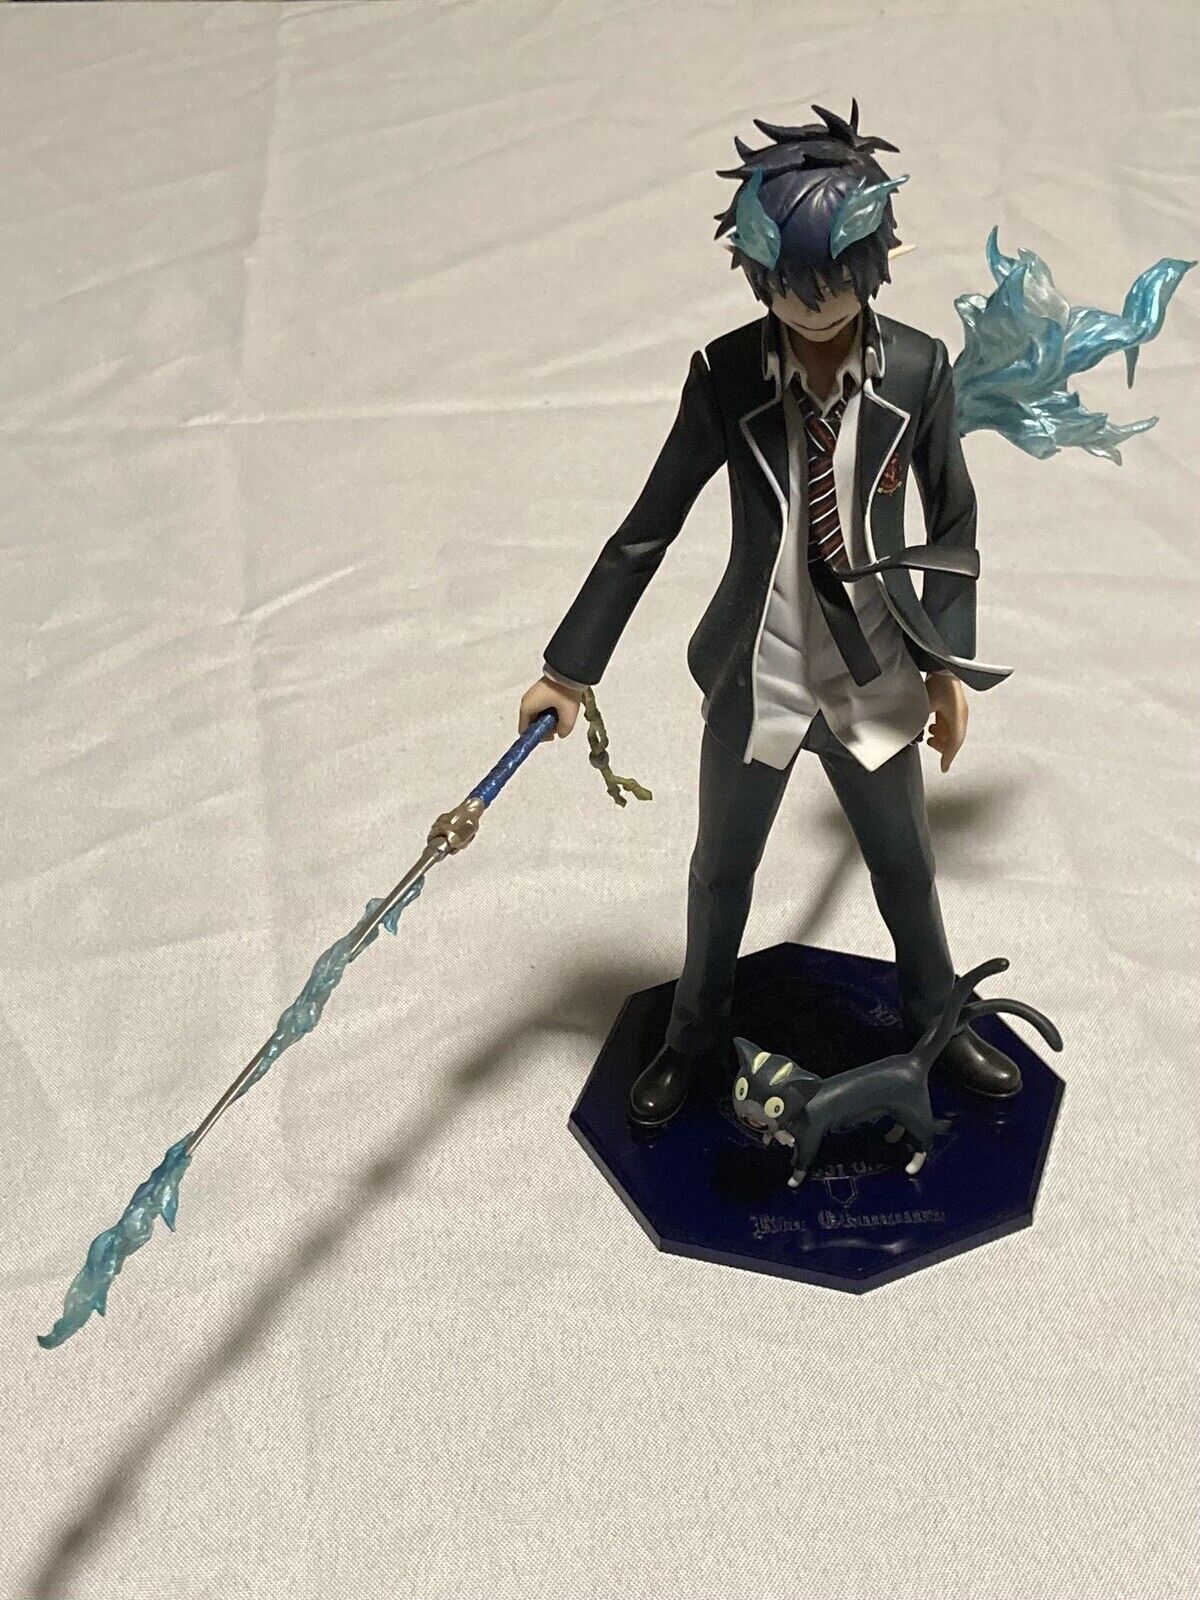 Blue Exorcist Rin Okumura MegaHouse GEM Series Figure Statue Anime Collectible